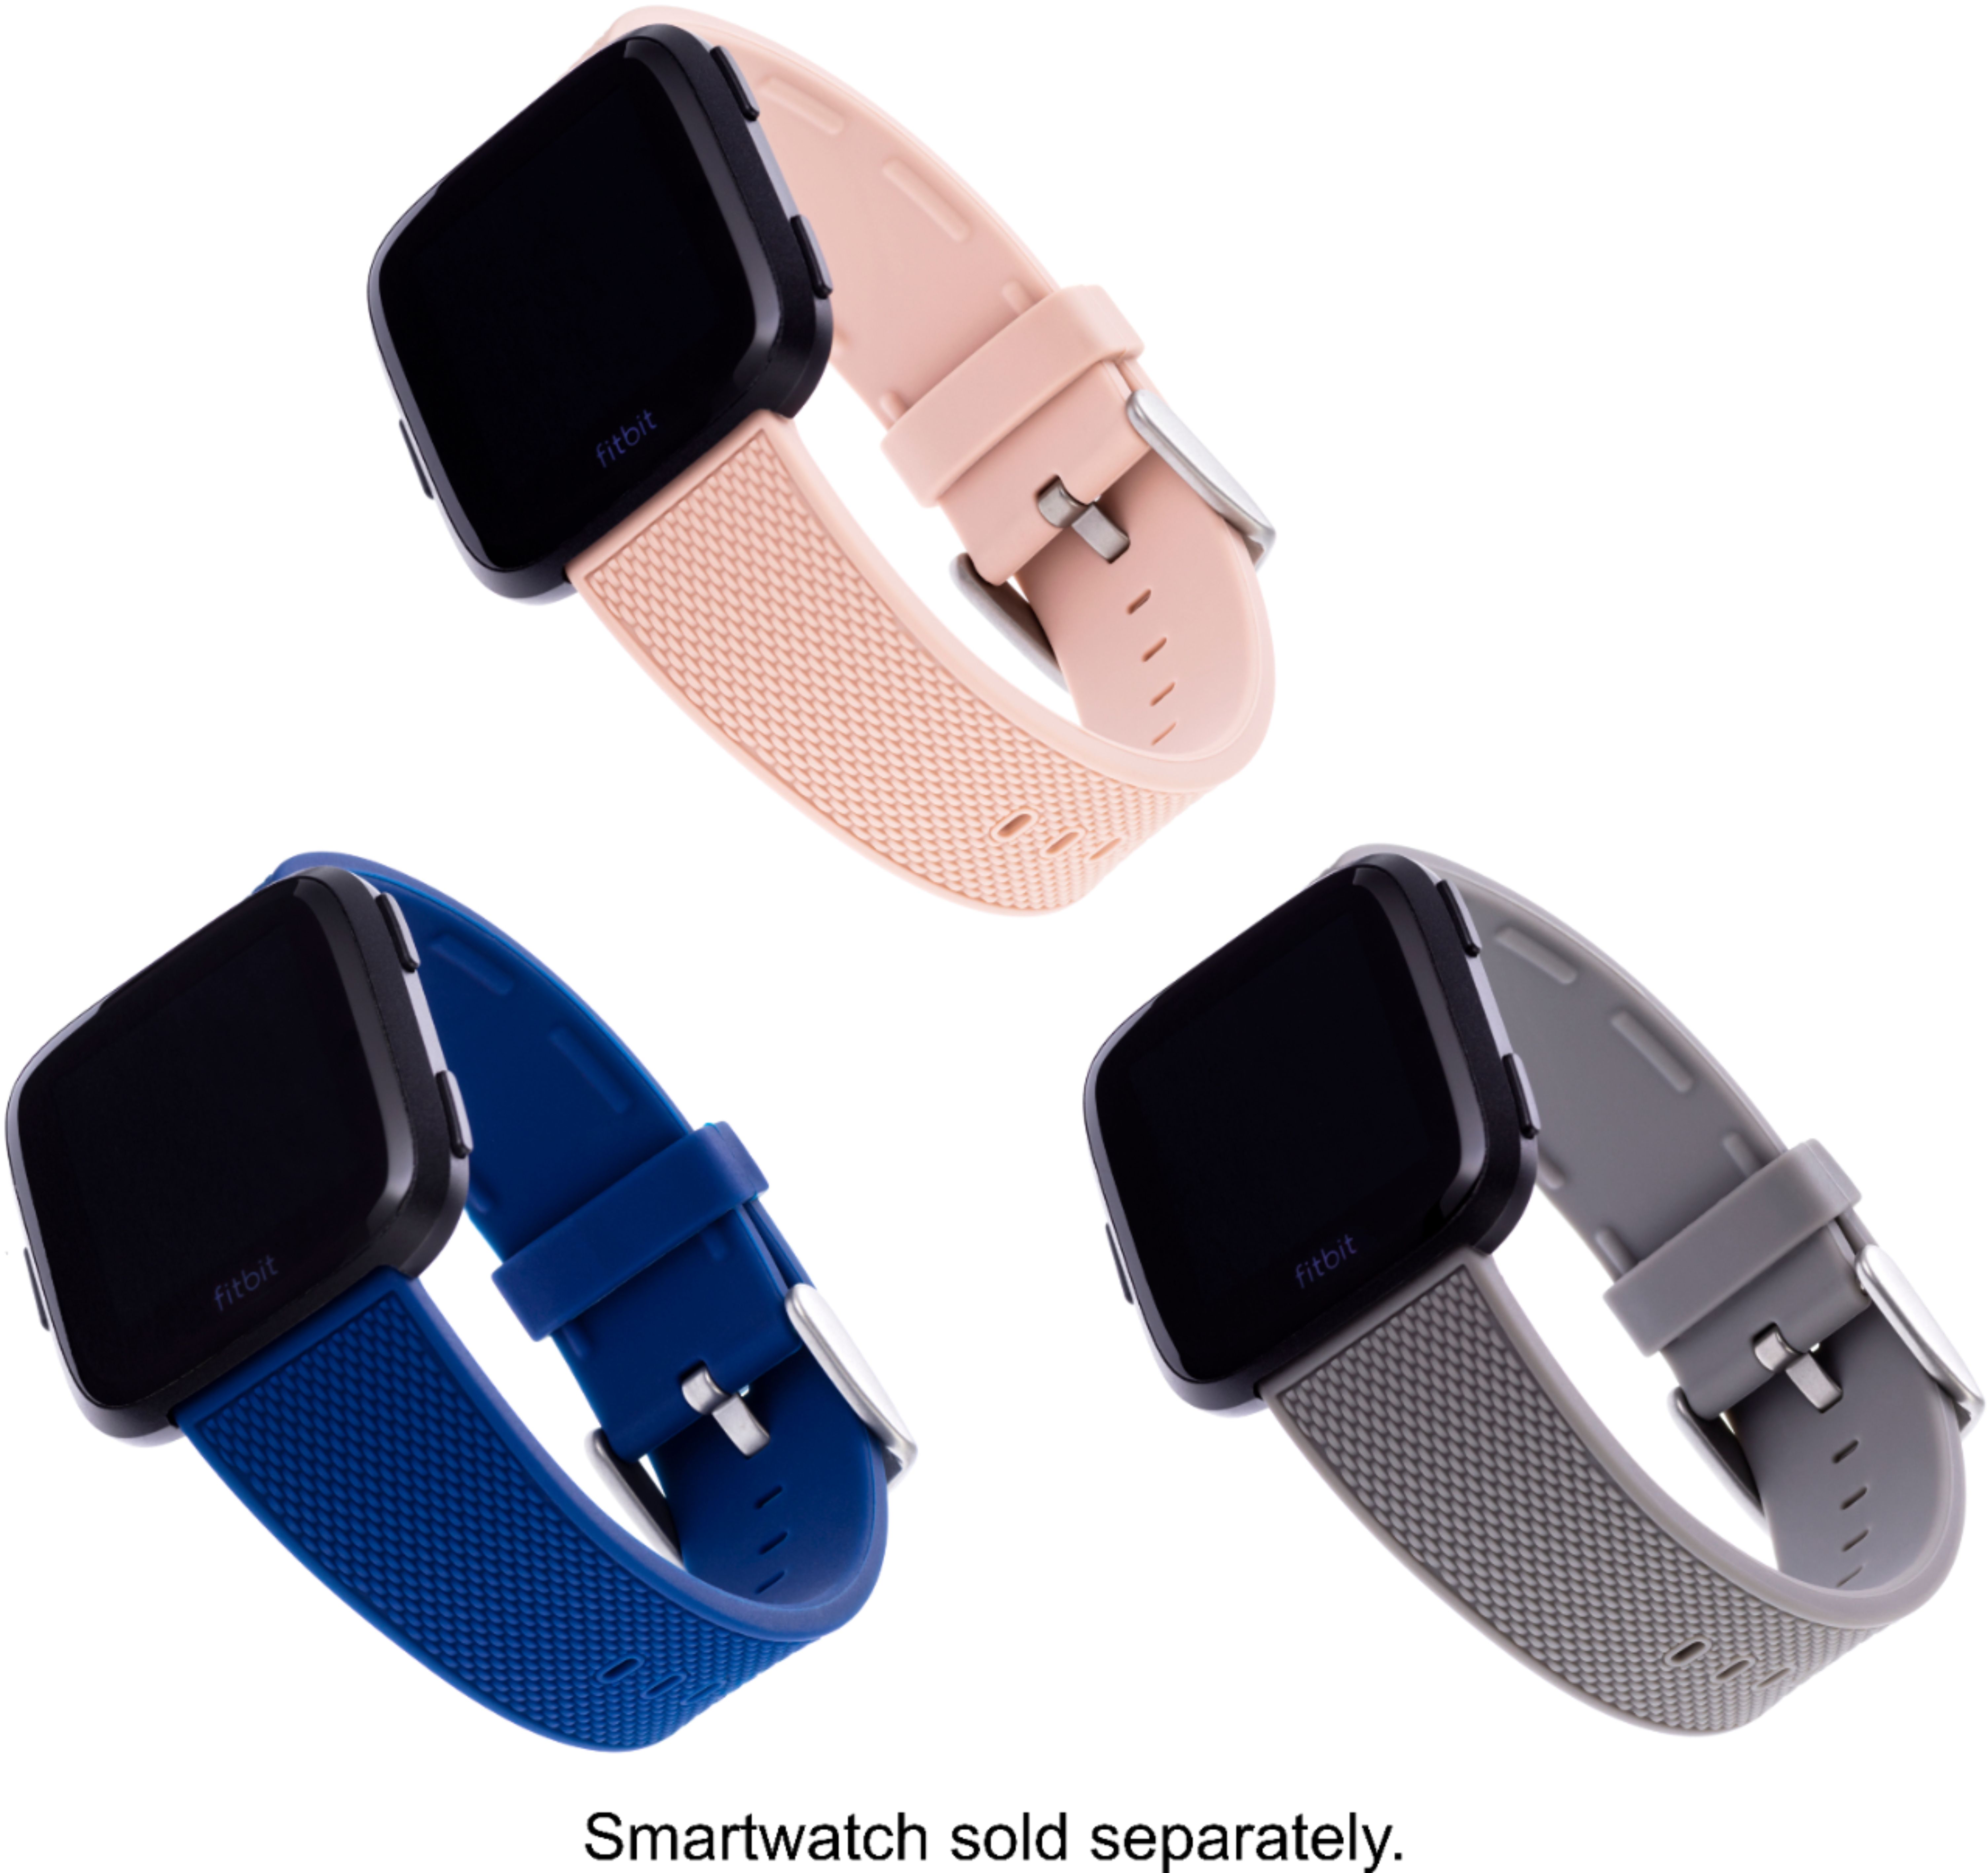 WITHit Fitbit Versa 3 & Fitbit Sense Silicone One size fits all